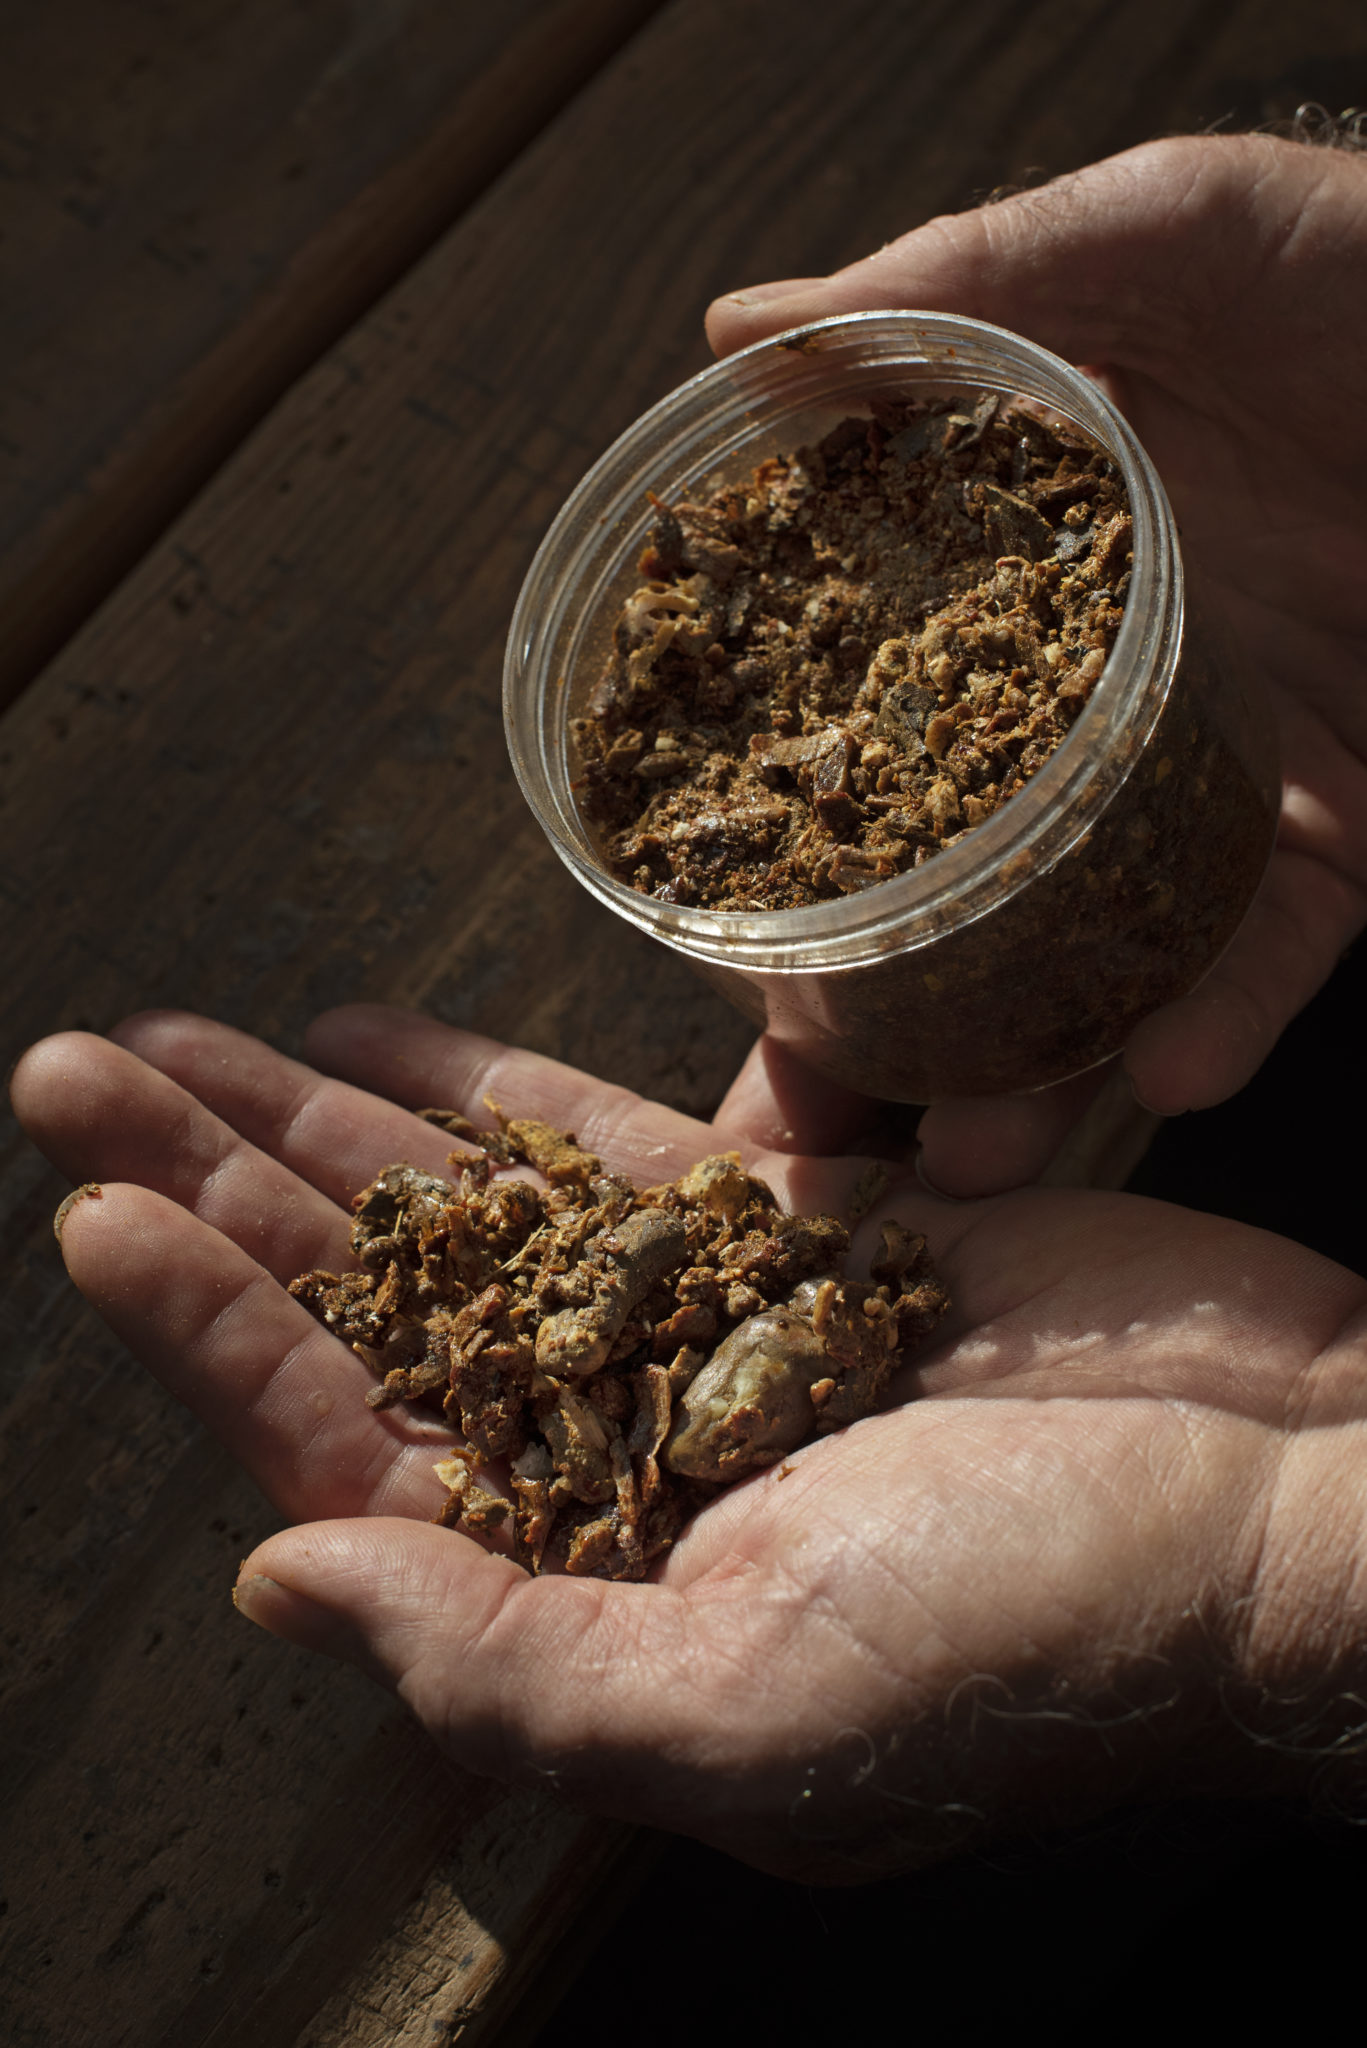 John McGinnis holding a pile of propolis, the resinous material collected by bees from the buds of trees and used as a cement in repairing and maintaining the hive at Goah Way Ranch in Petaluma, California on January 26, 2010. (Photo: Erik Castro/for Sonoma Magazine)